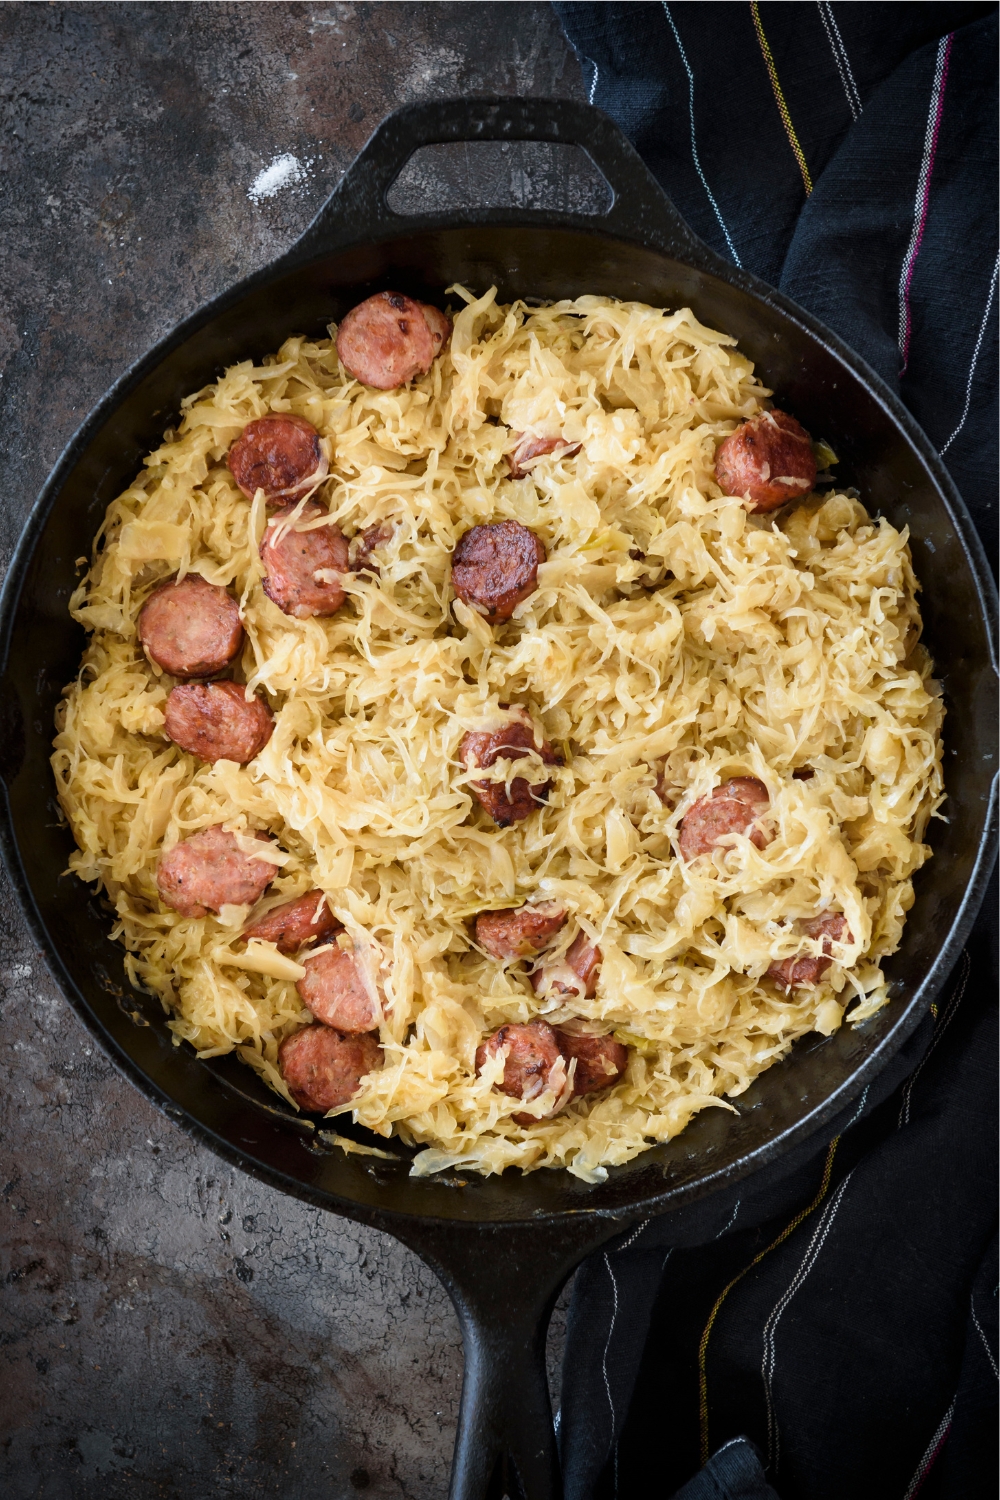 A cast iron skillet filled with sauerkraut and sliced sausages.